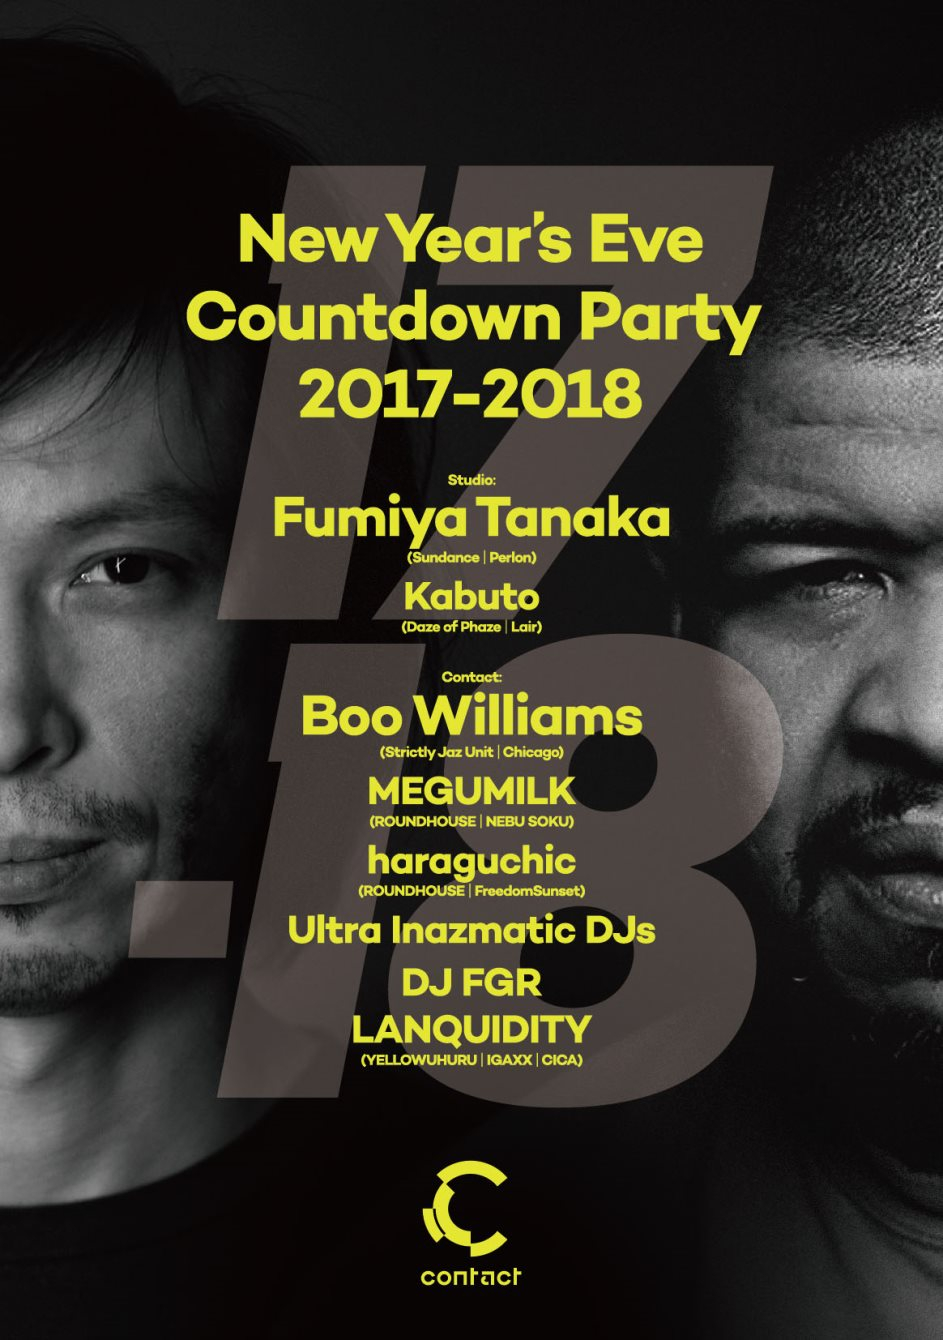 New Year's Eve Countdown Party 2017-2018 - Flyer front